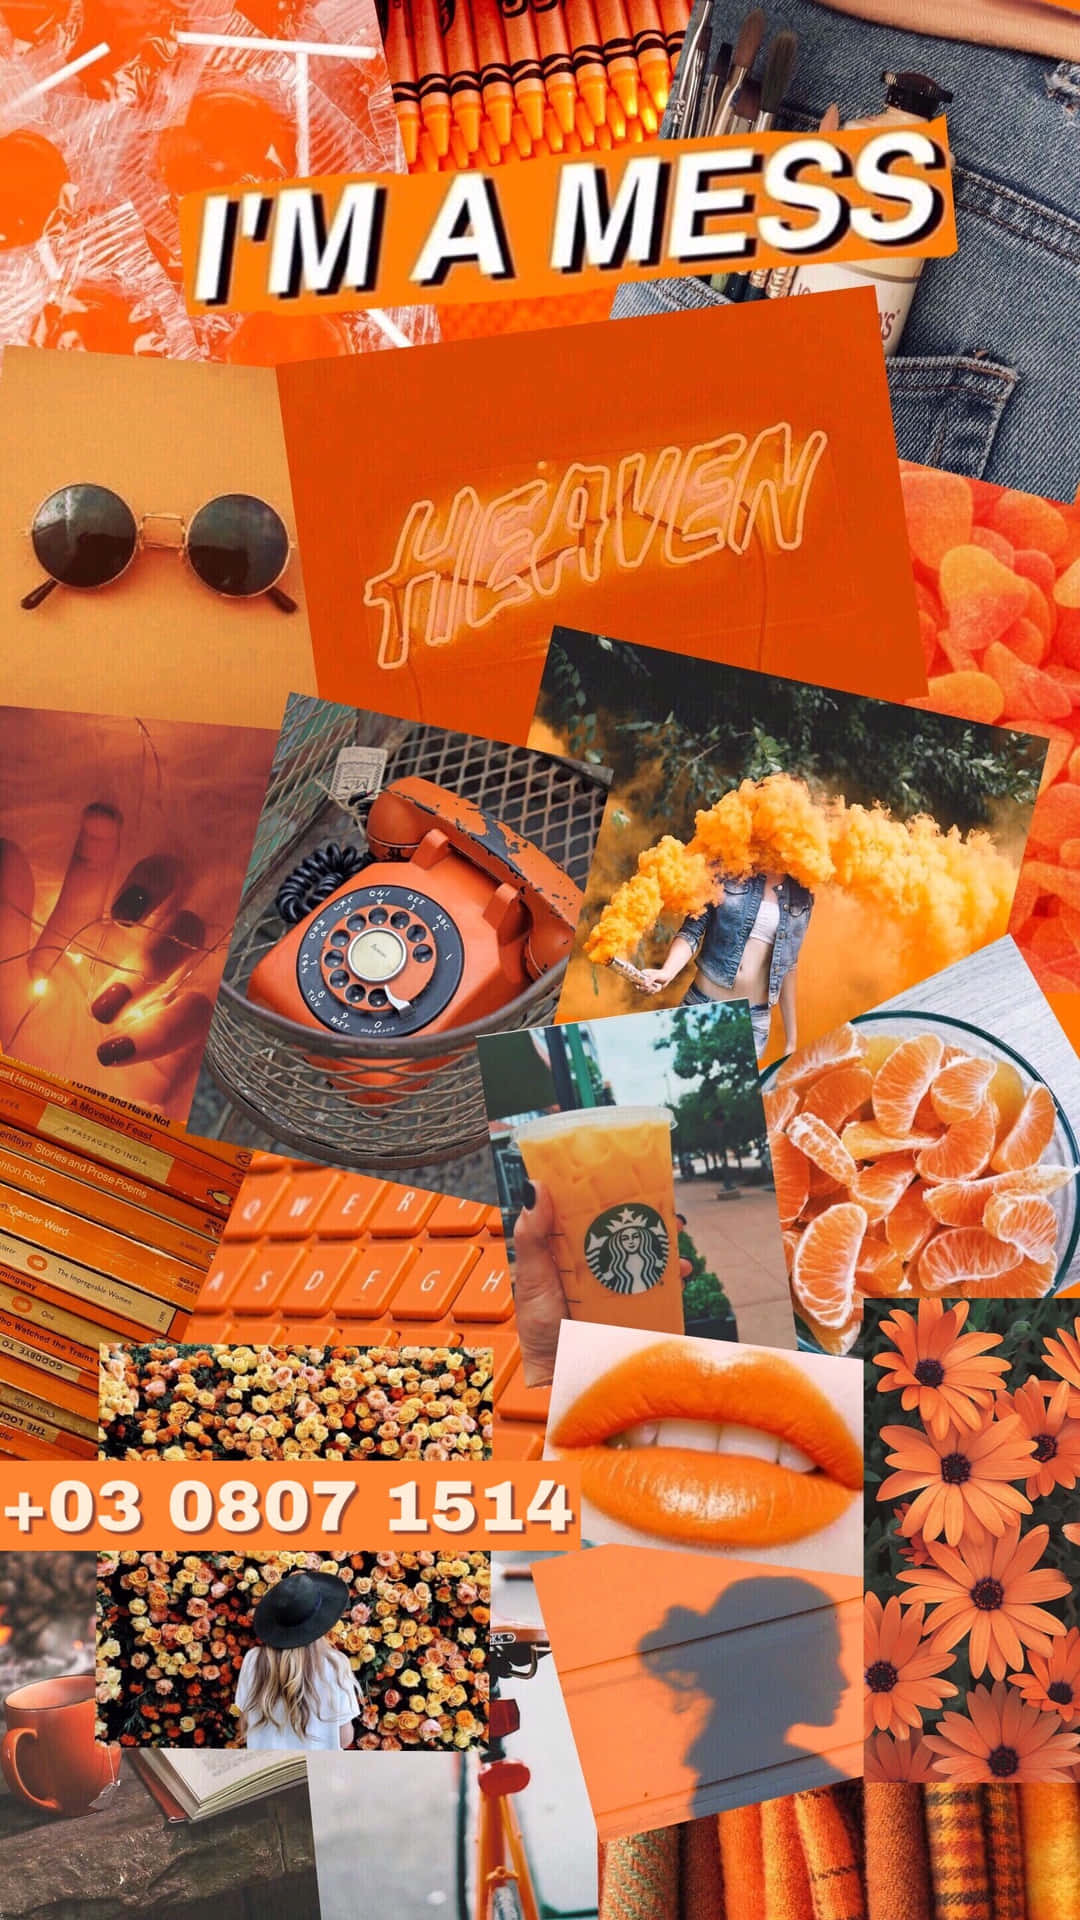 Relax with this calming and vibrant orange aesthetic.